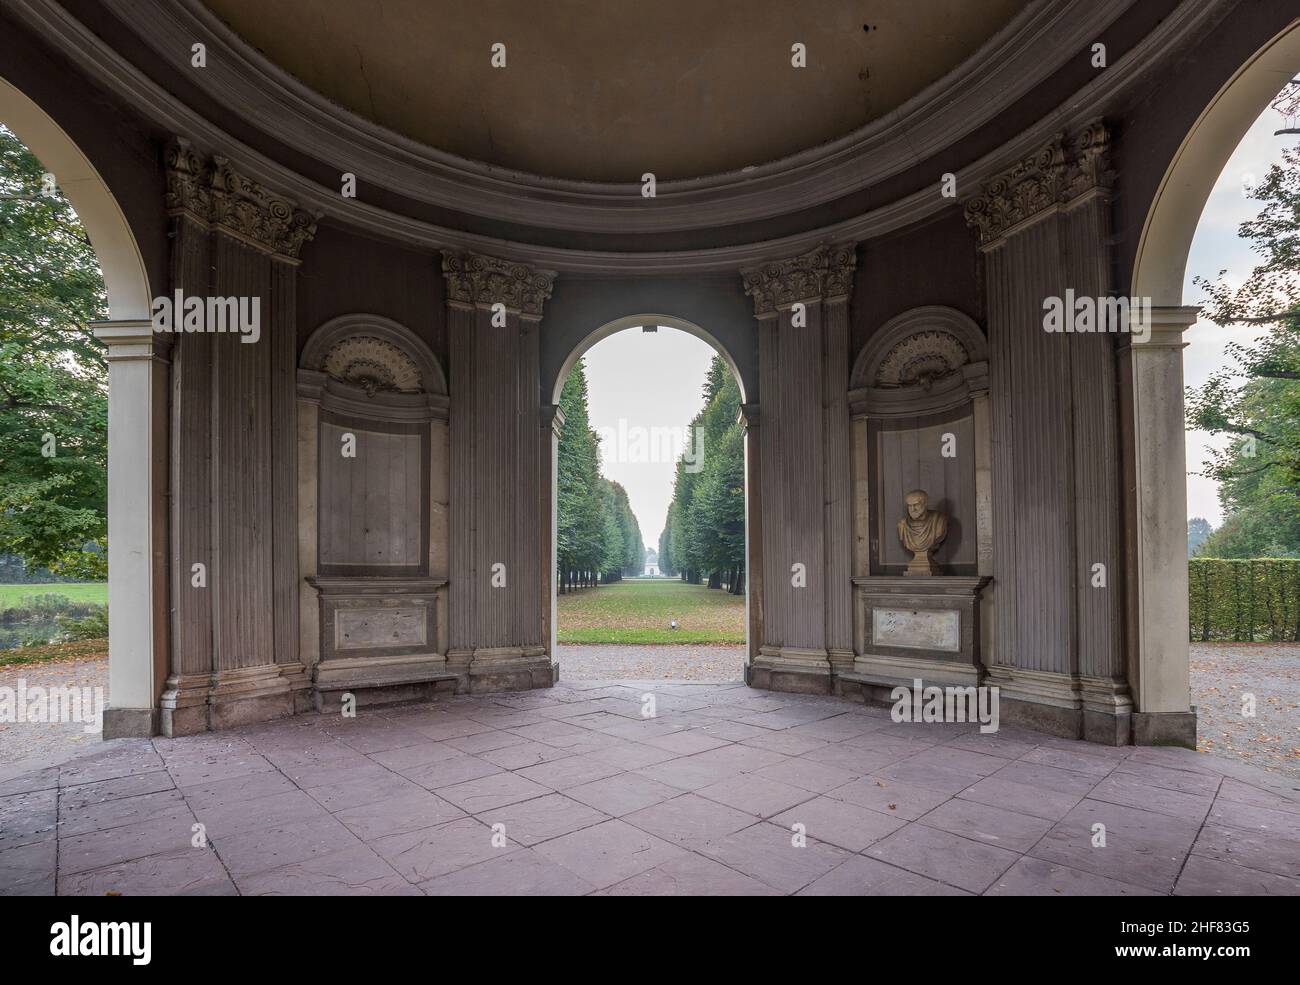 Germany,  Lower Saxony,  Hanover,  pavilion / temple Remy de la Fosse of the Herrenhausen Gardens in the evening Stock Photo